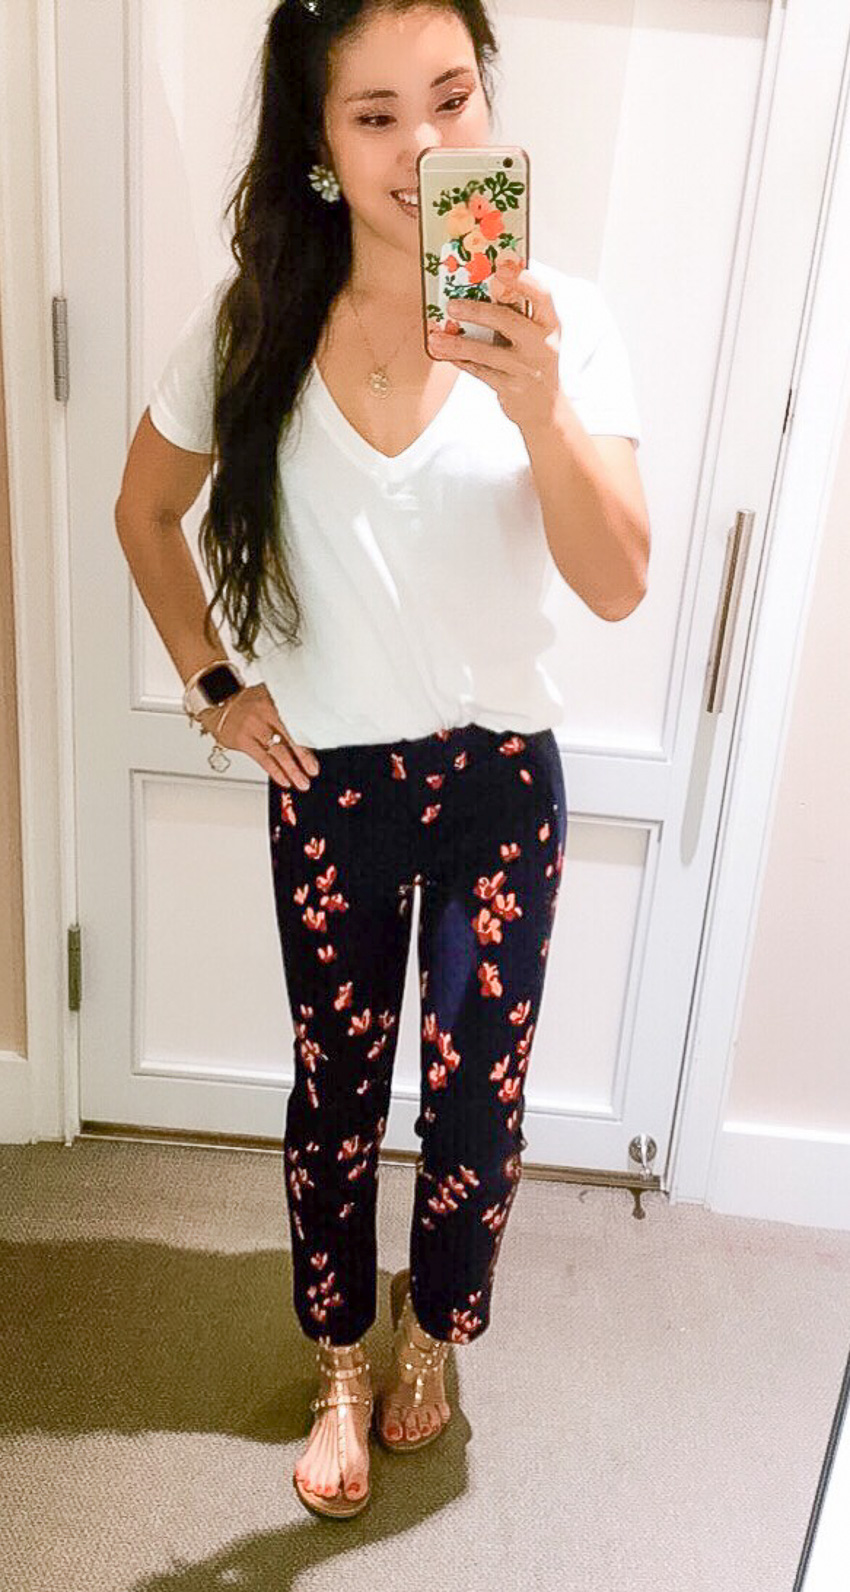 LOFT Sale: Dressing Room Diaries by Dallas fashion blogger cute and little | floral ankle pants blue star | loft dressing room review